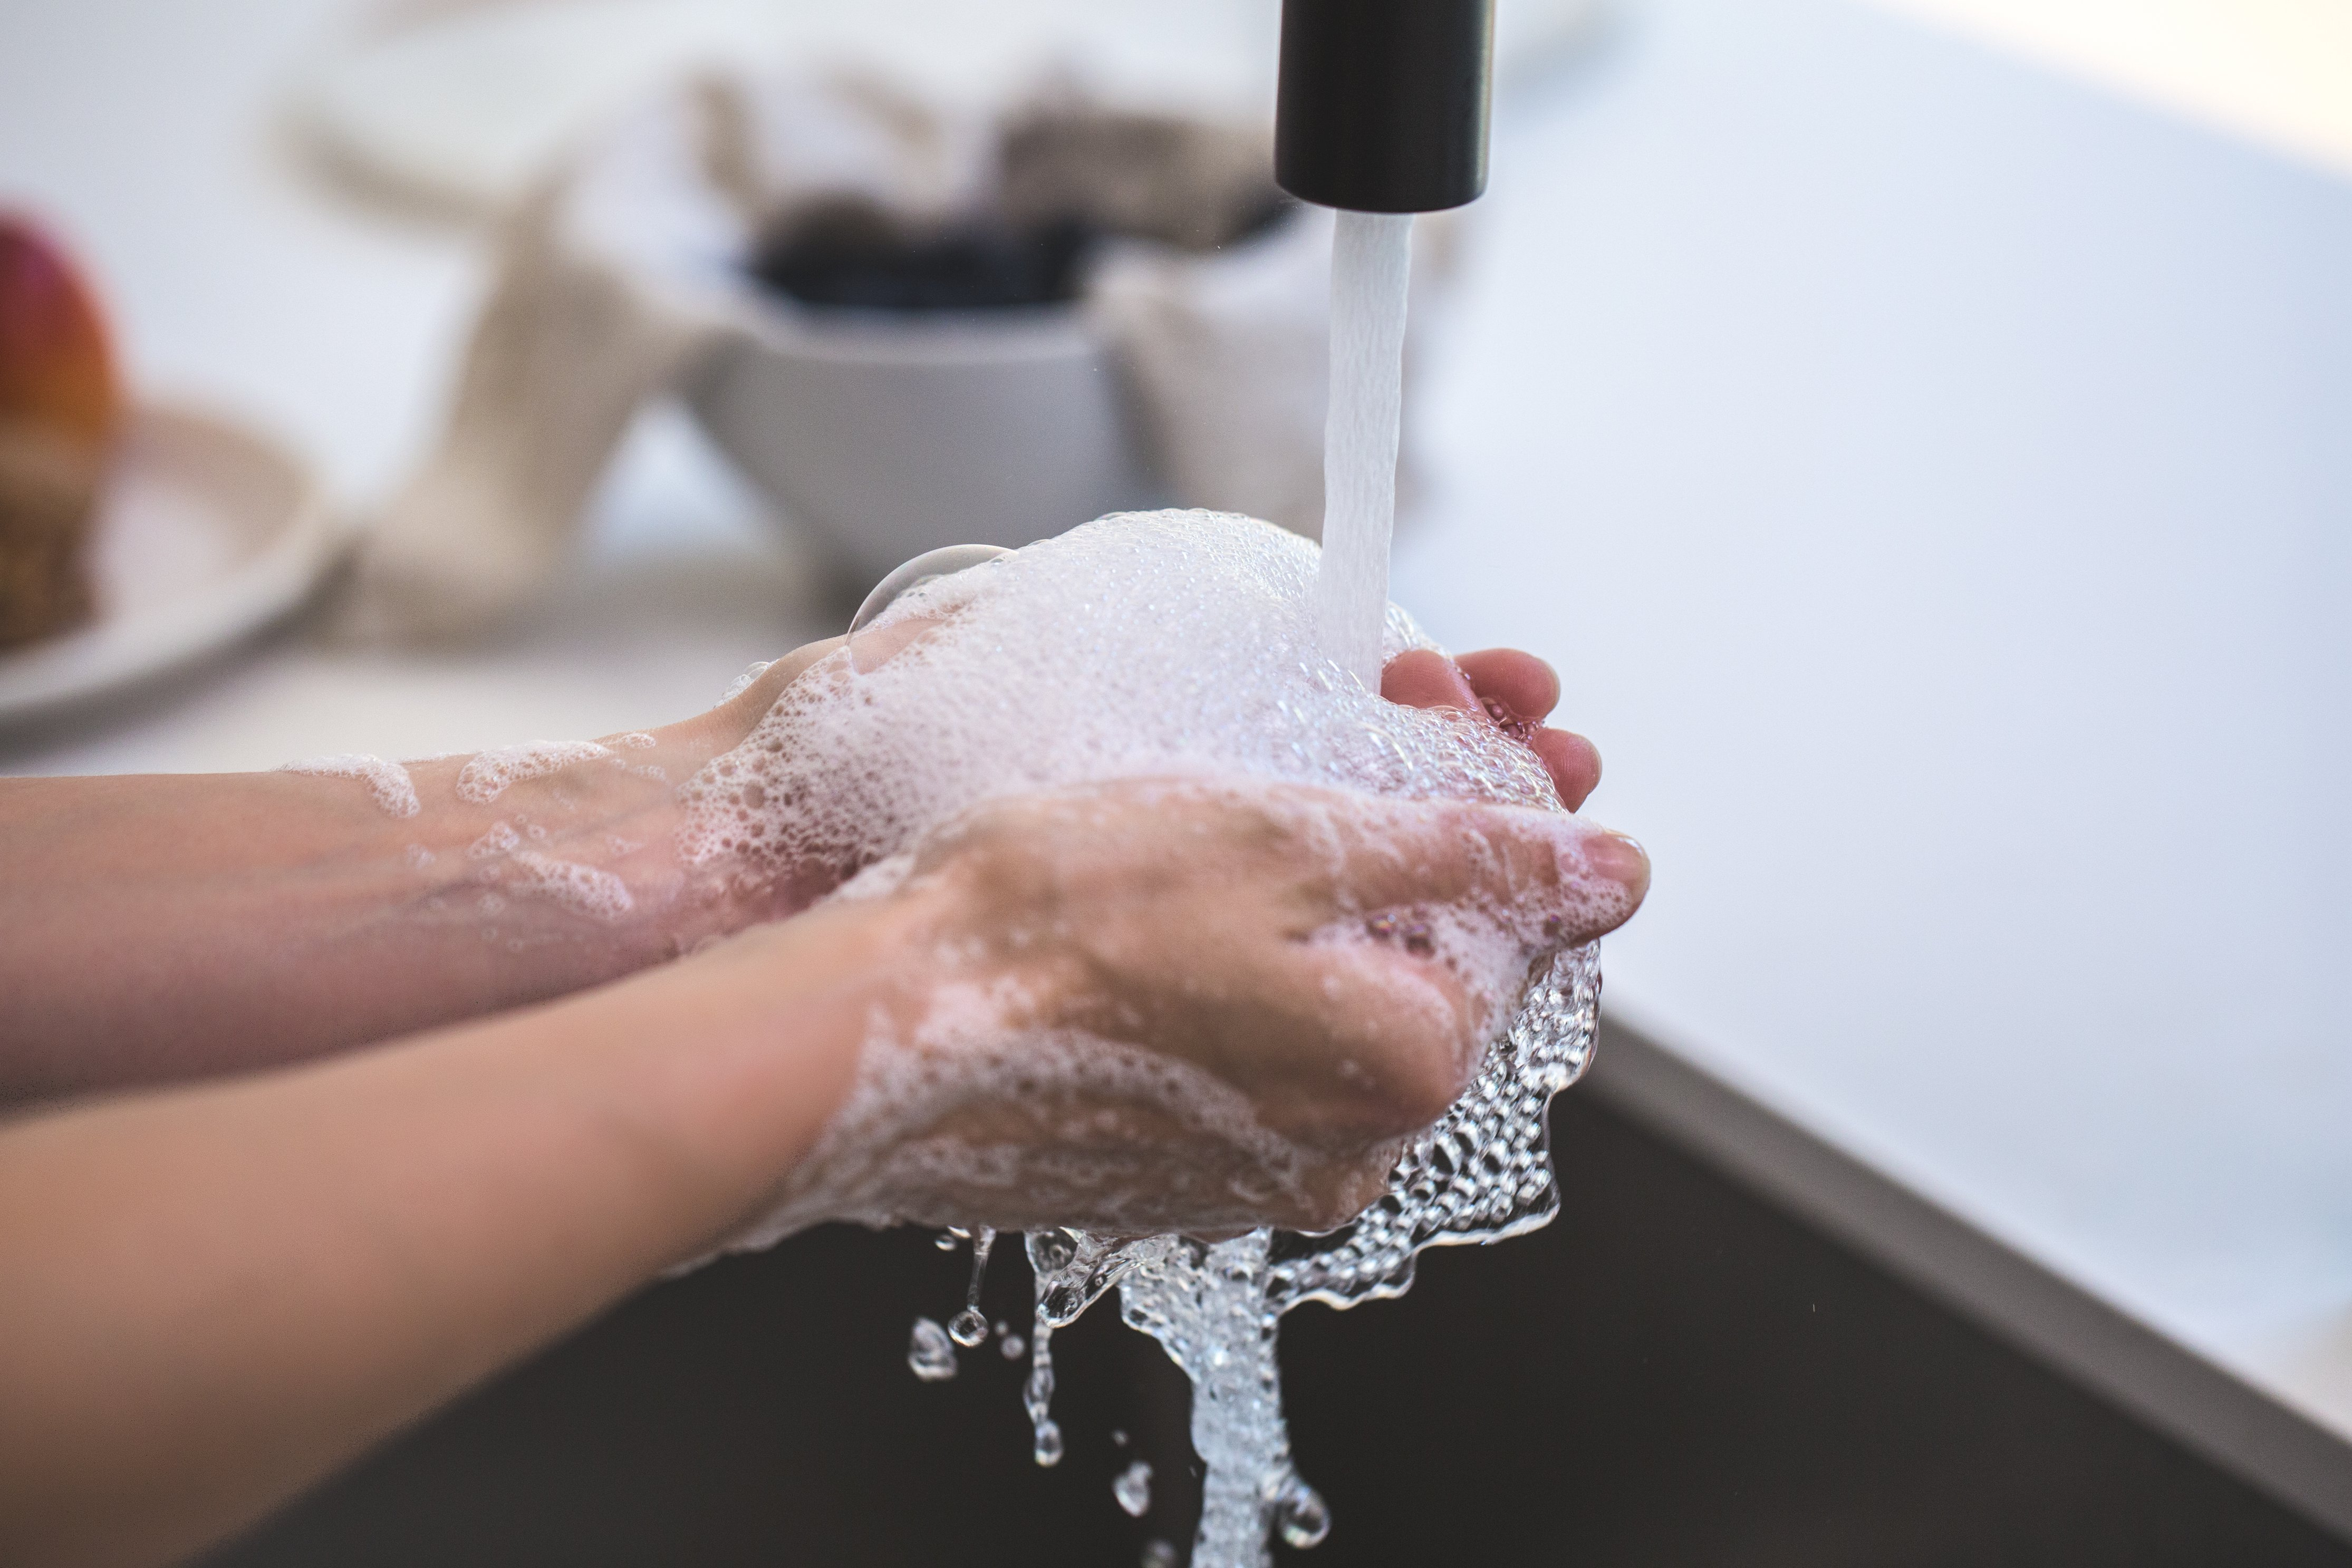 Washing hands with soap lather under facet tap